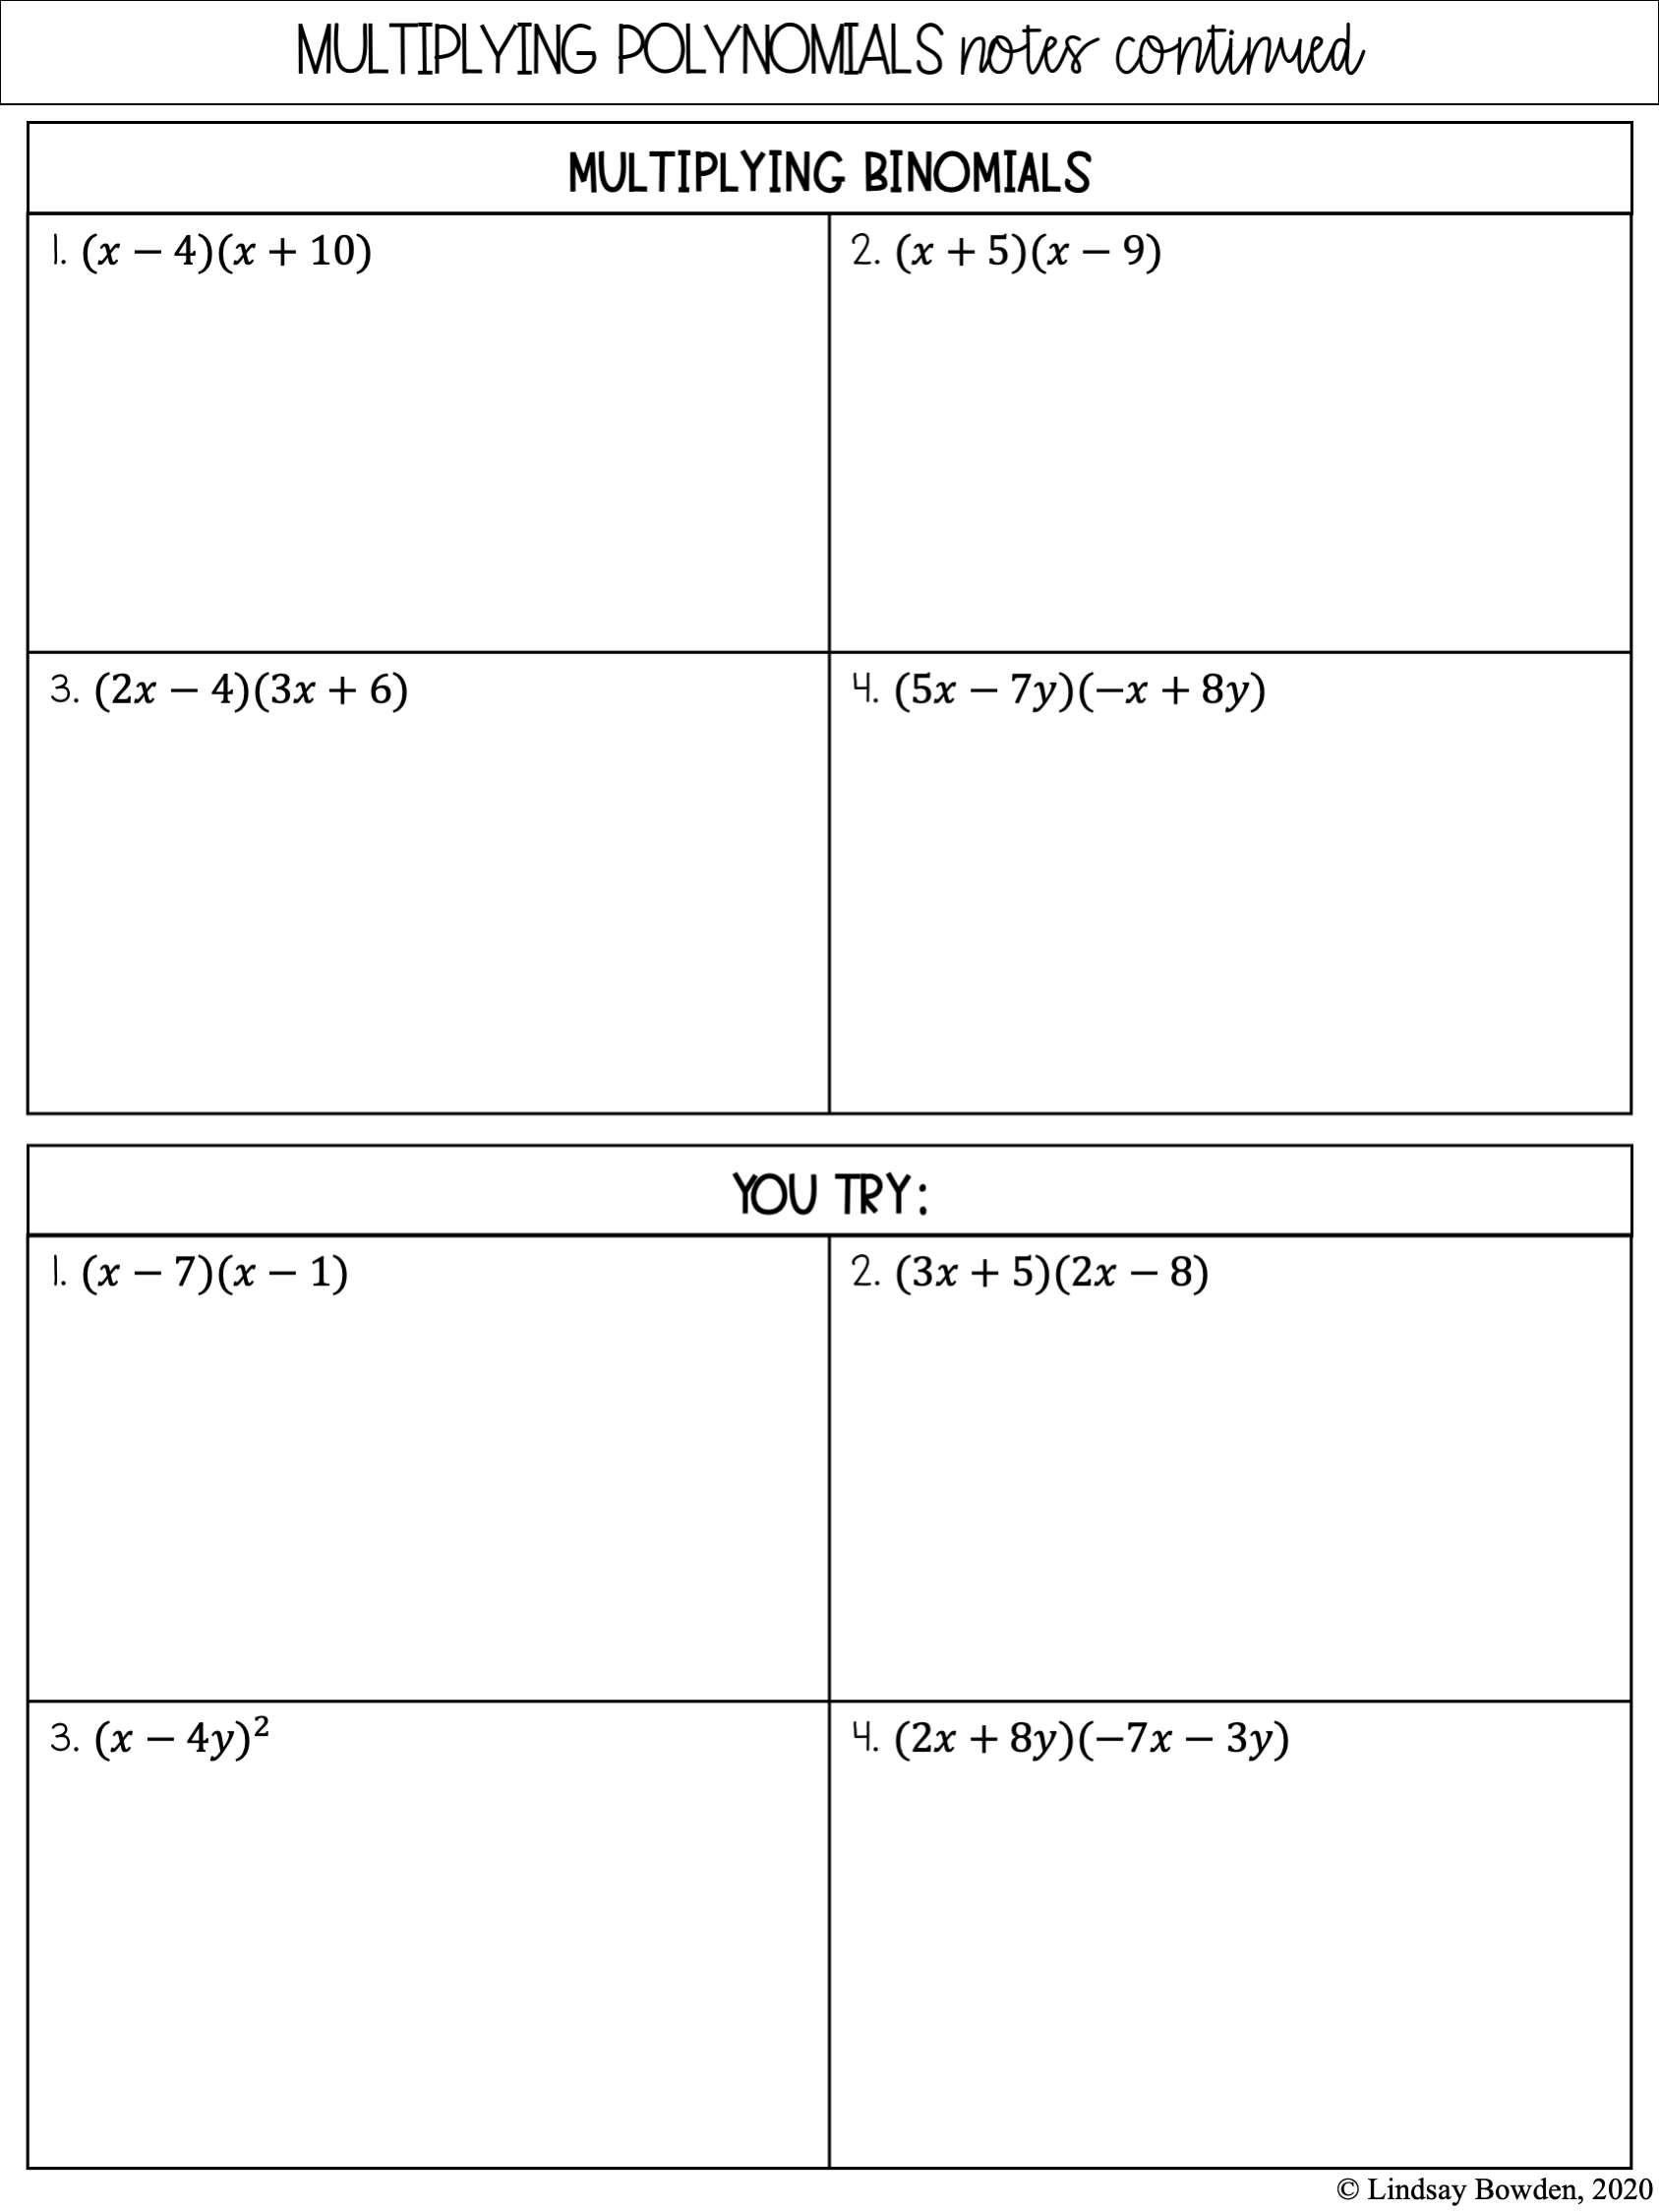 Multiplying Polynomials Notes and Worksheets - Lindsay Bowden Intended For Multiplying Polynomials Worksheet 1 Answers